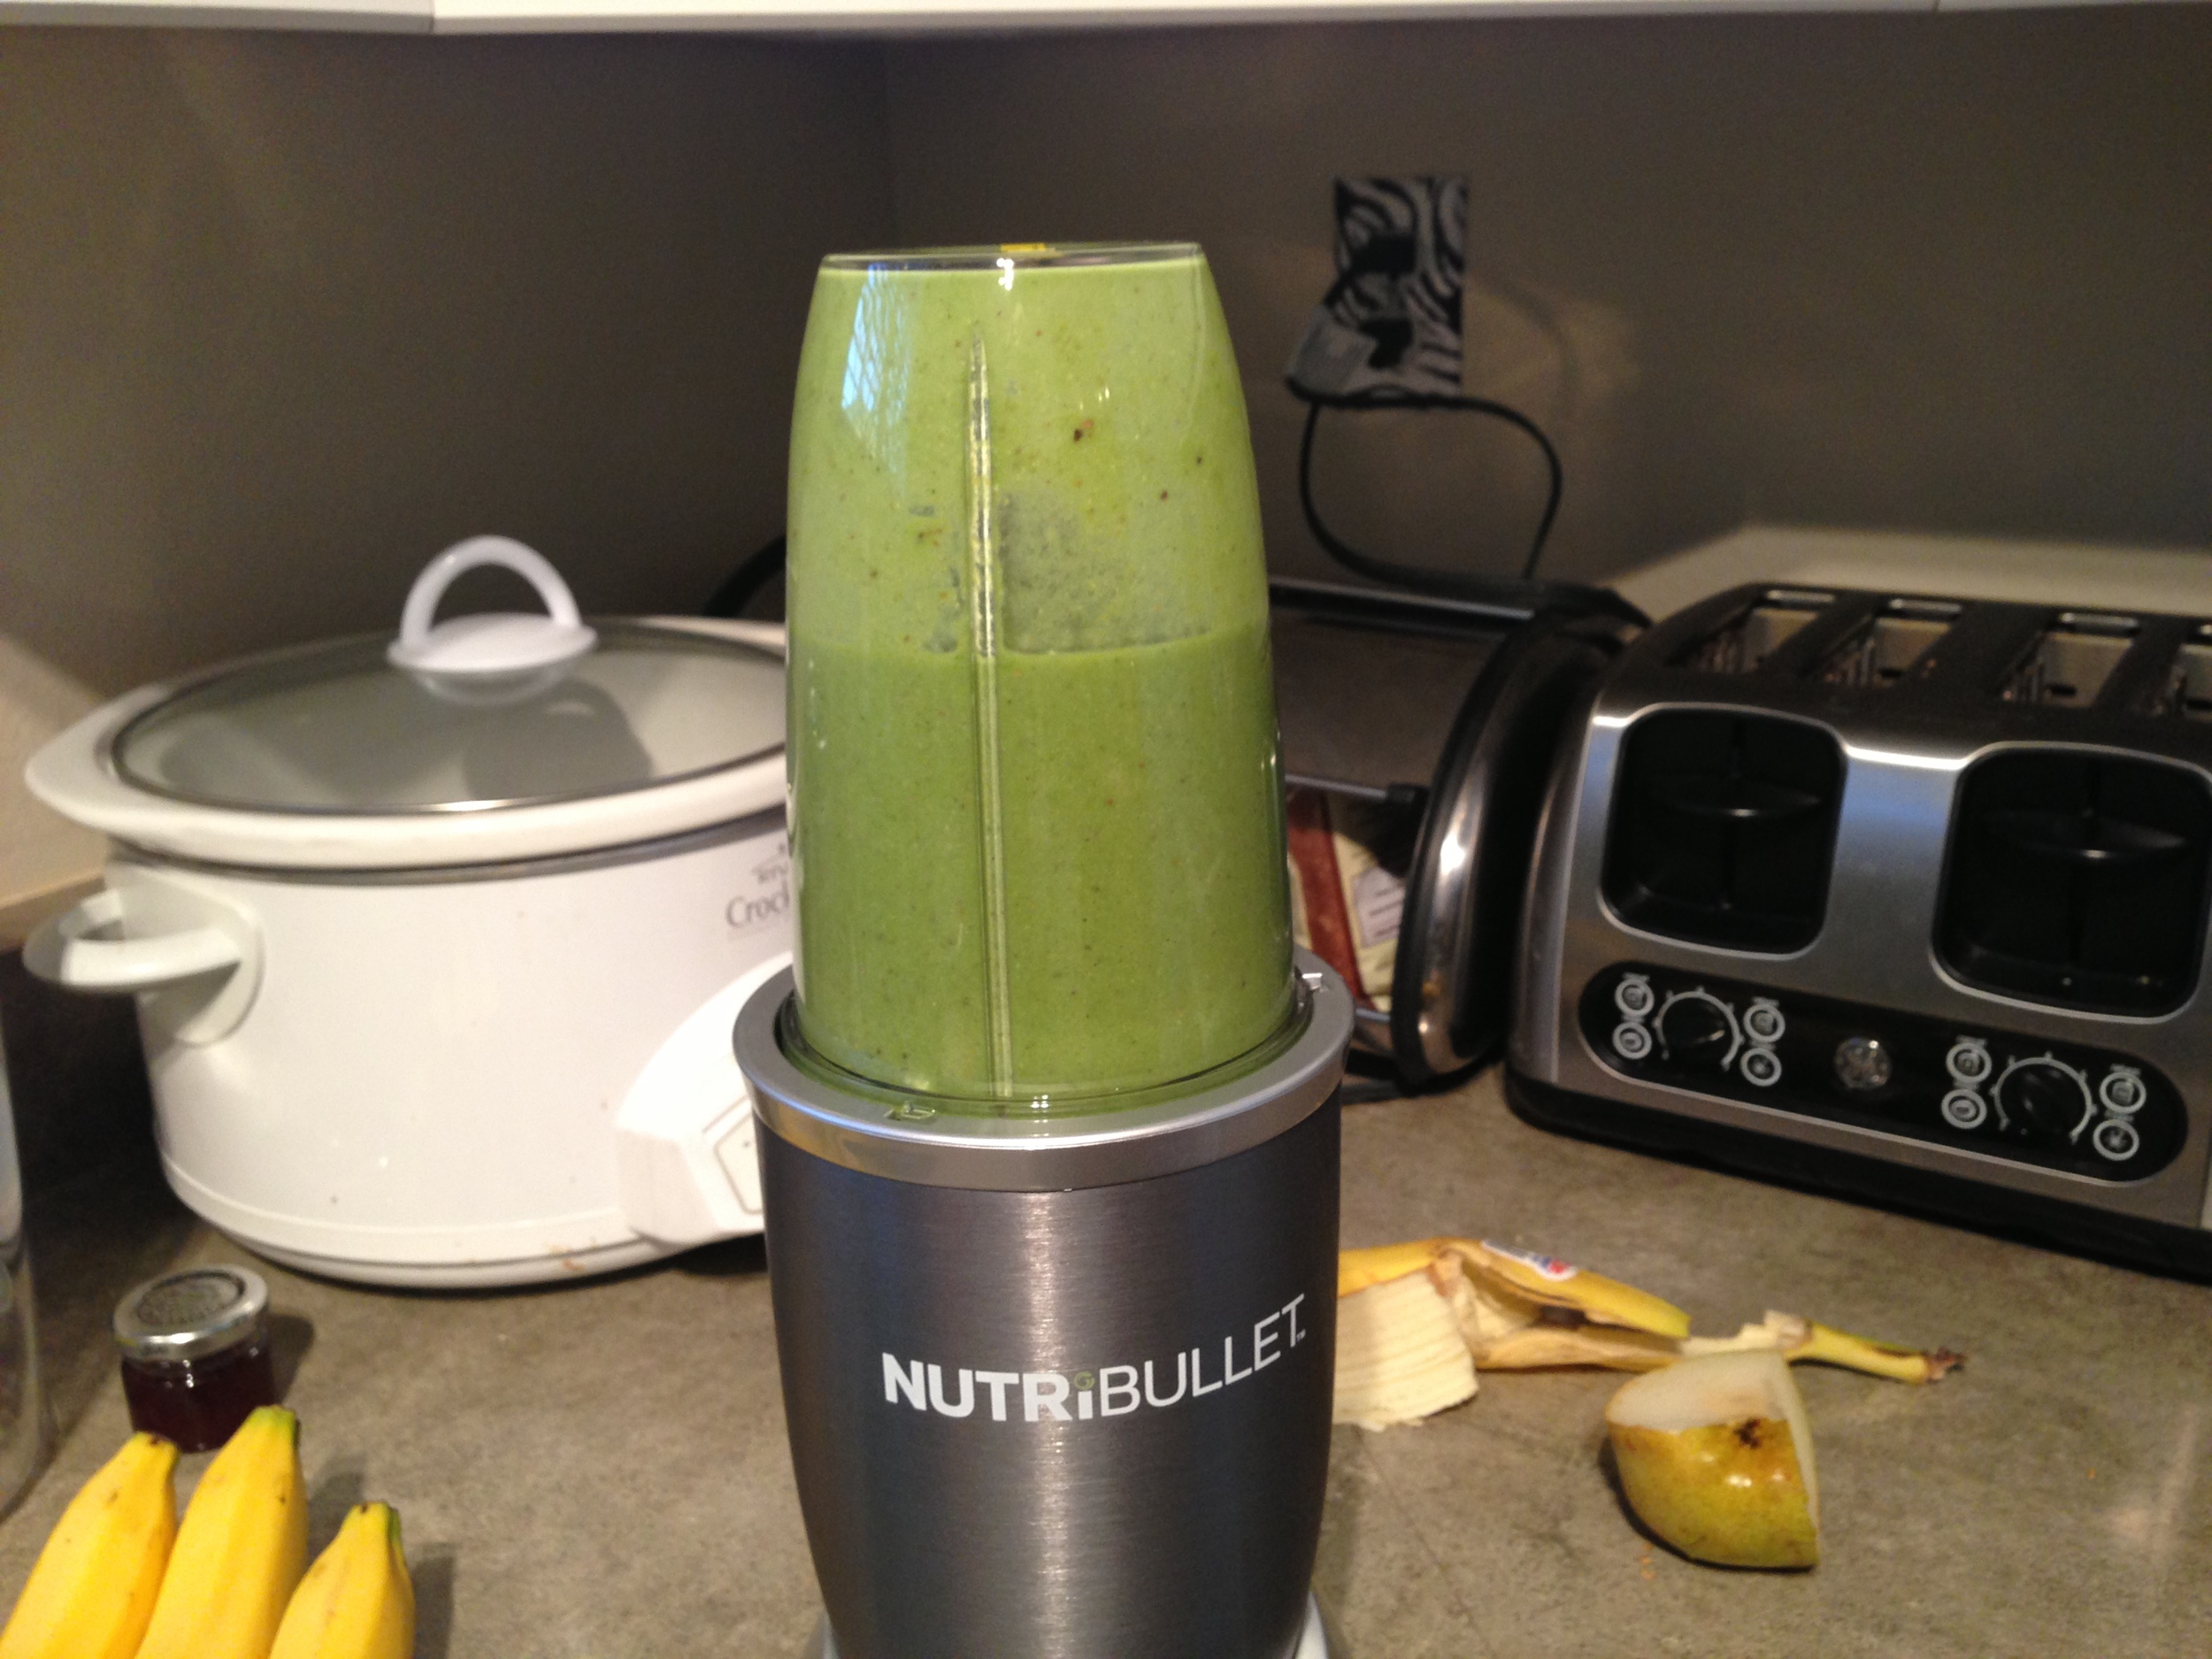  The Nutribullet in action. 